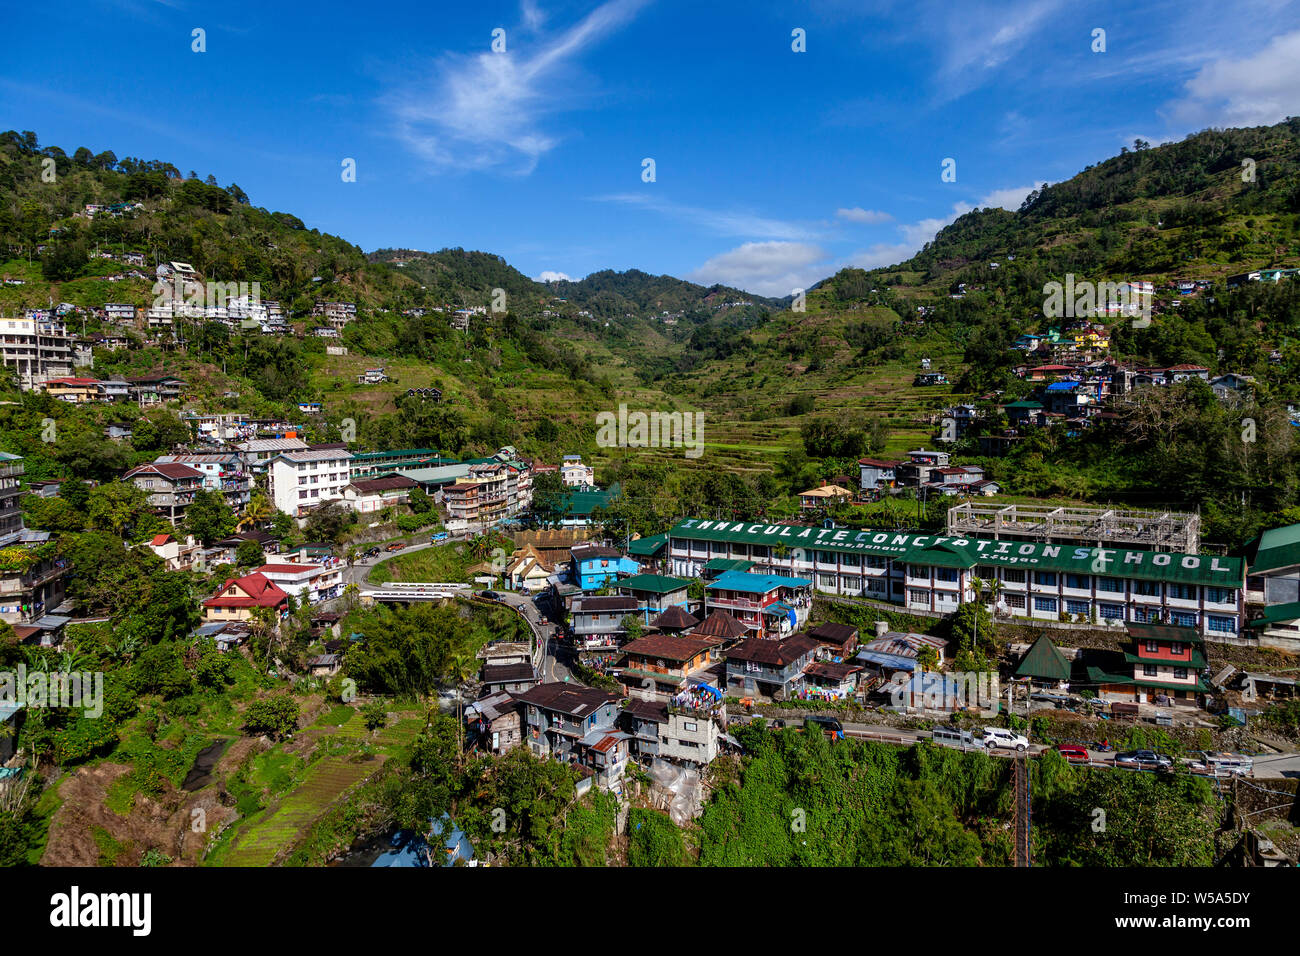 The Town Of Banaue, Luzon, The Philippines Stock Photo